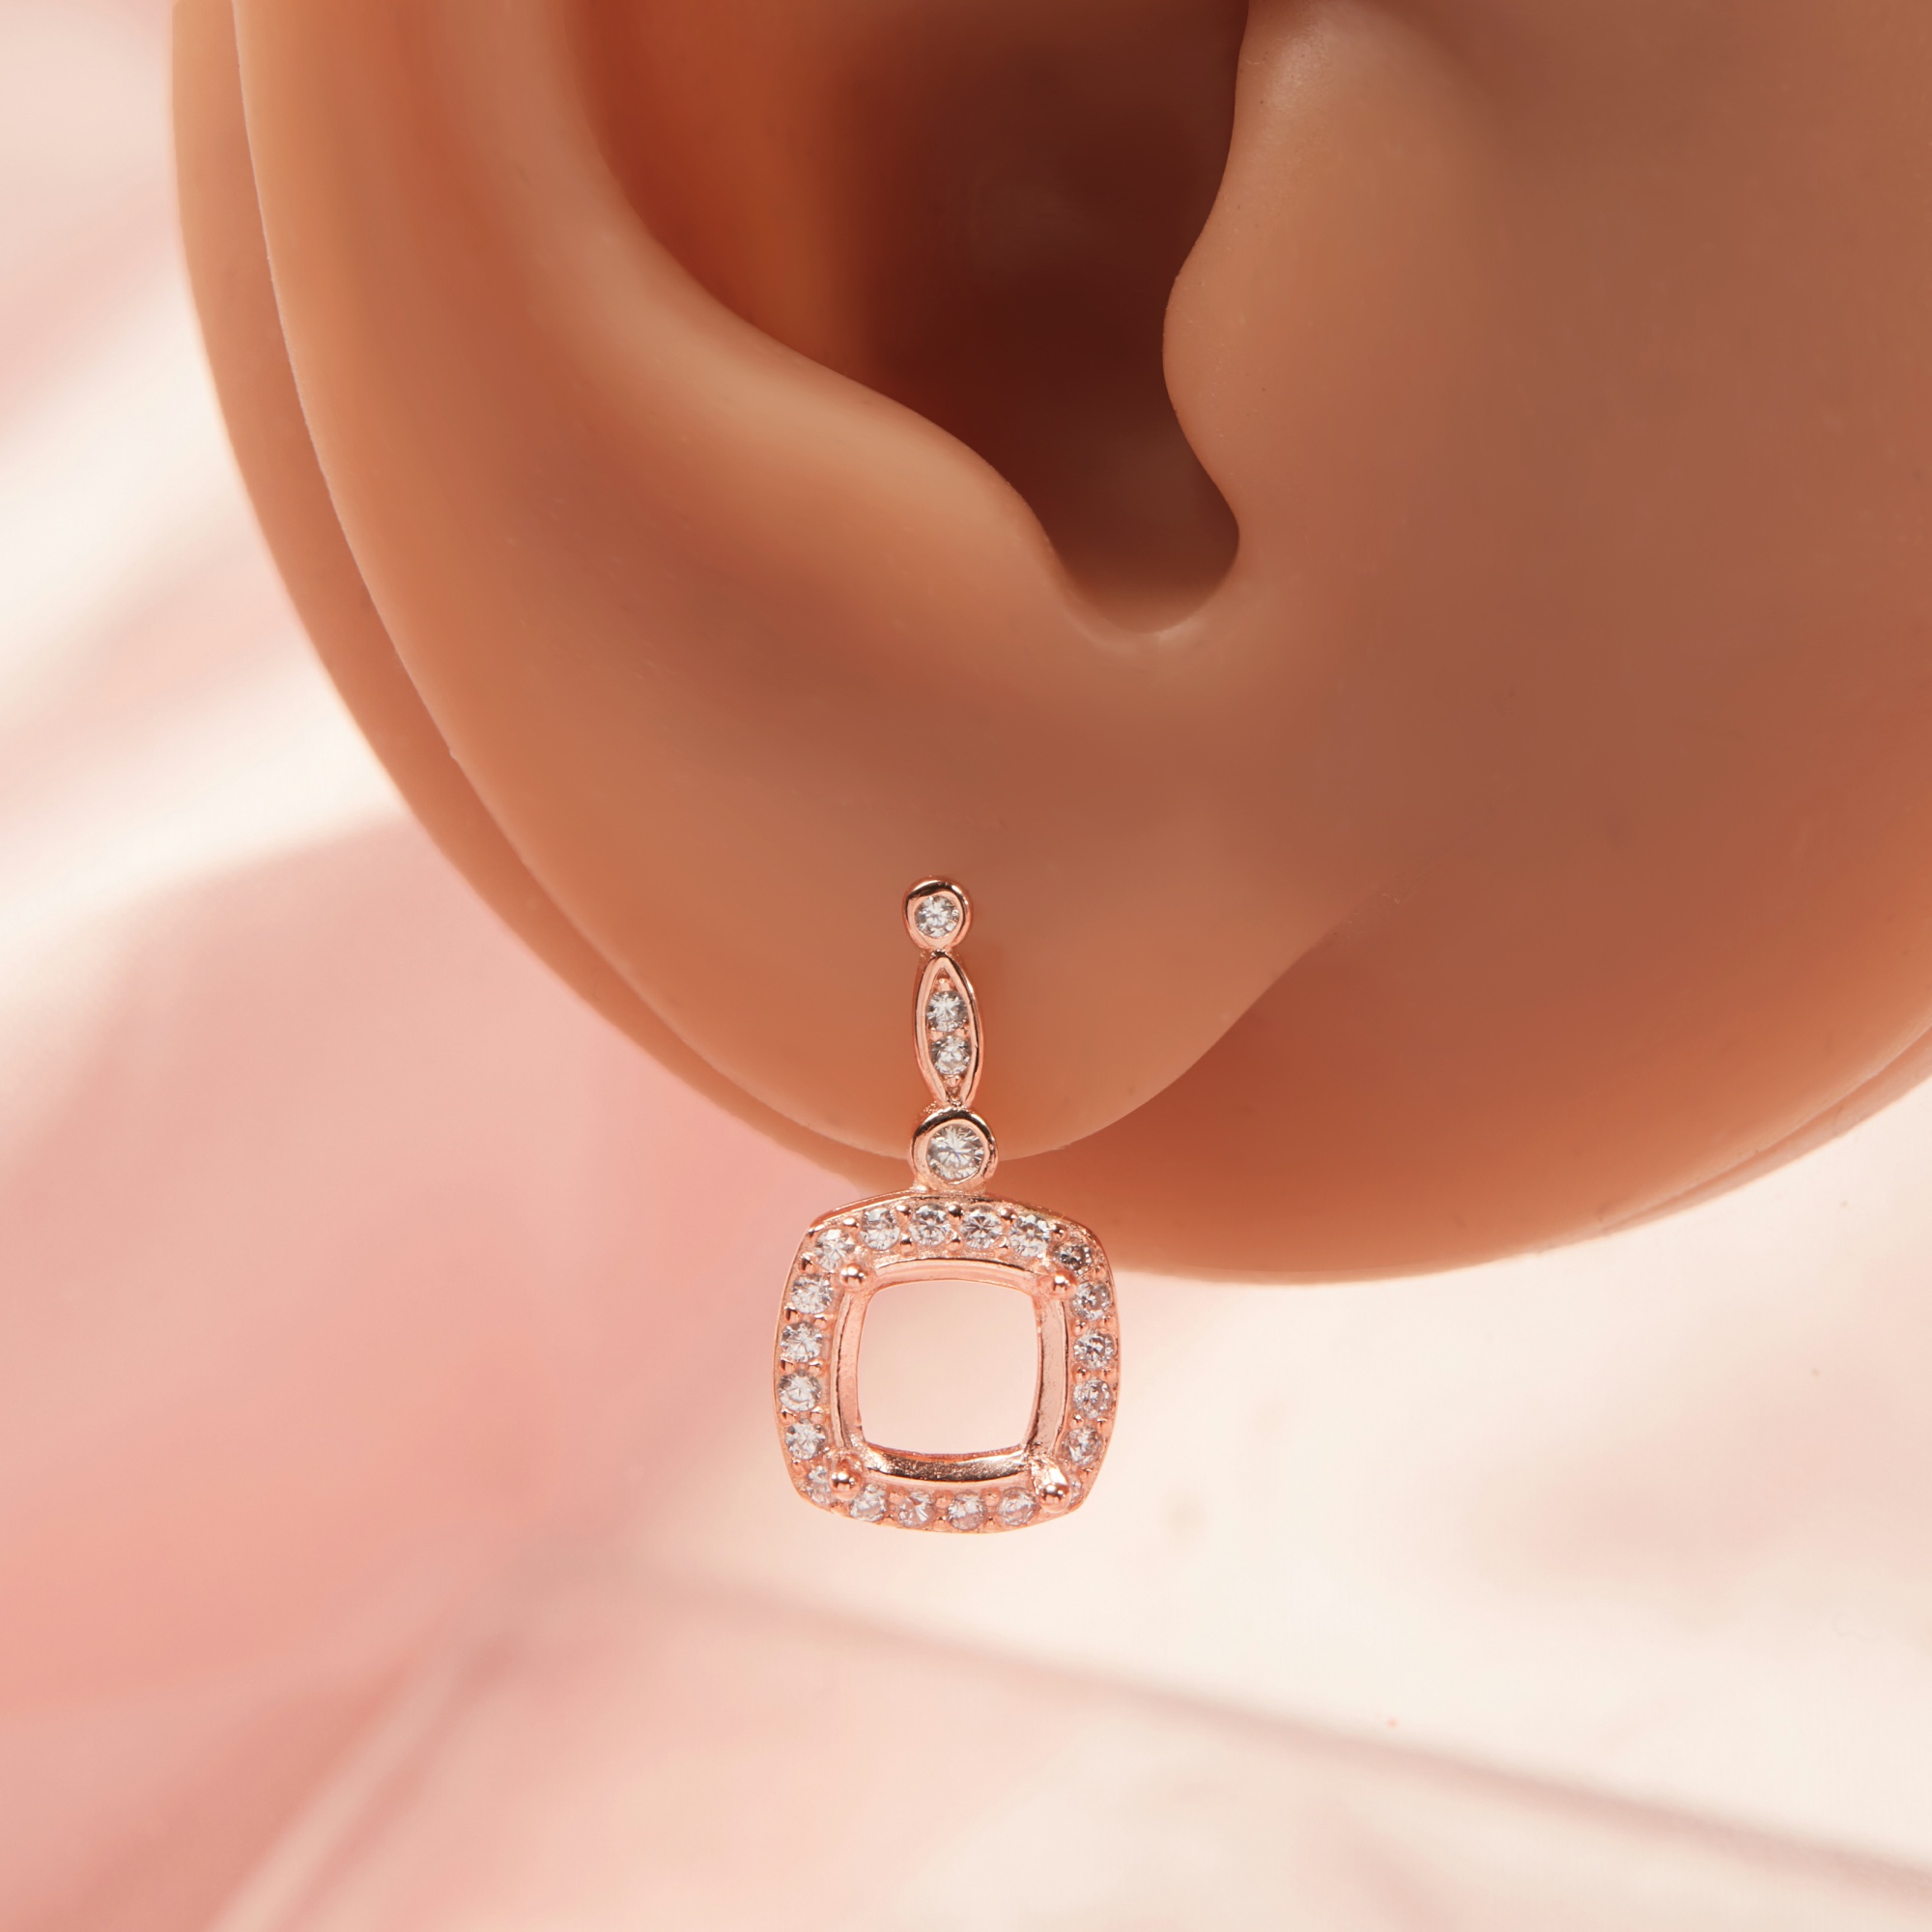 1Pair 6MM Cushion Square Prong Bezel Studs Earrings Settings,Solid 14K 18K Gold Earring,Halo Pave Moissanite Earring 1706142 - Click Image to Close